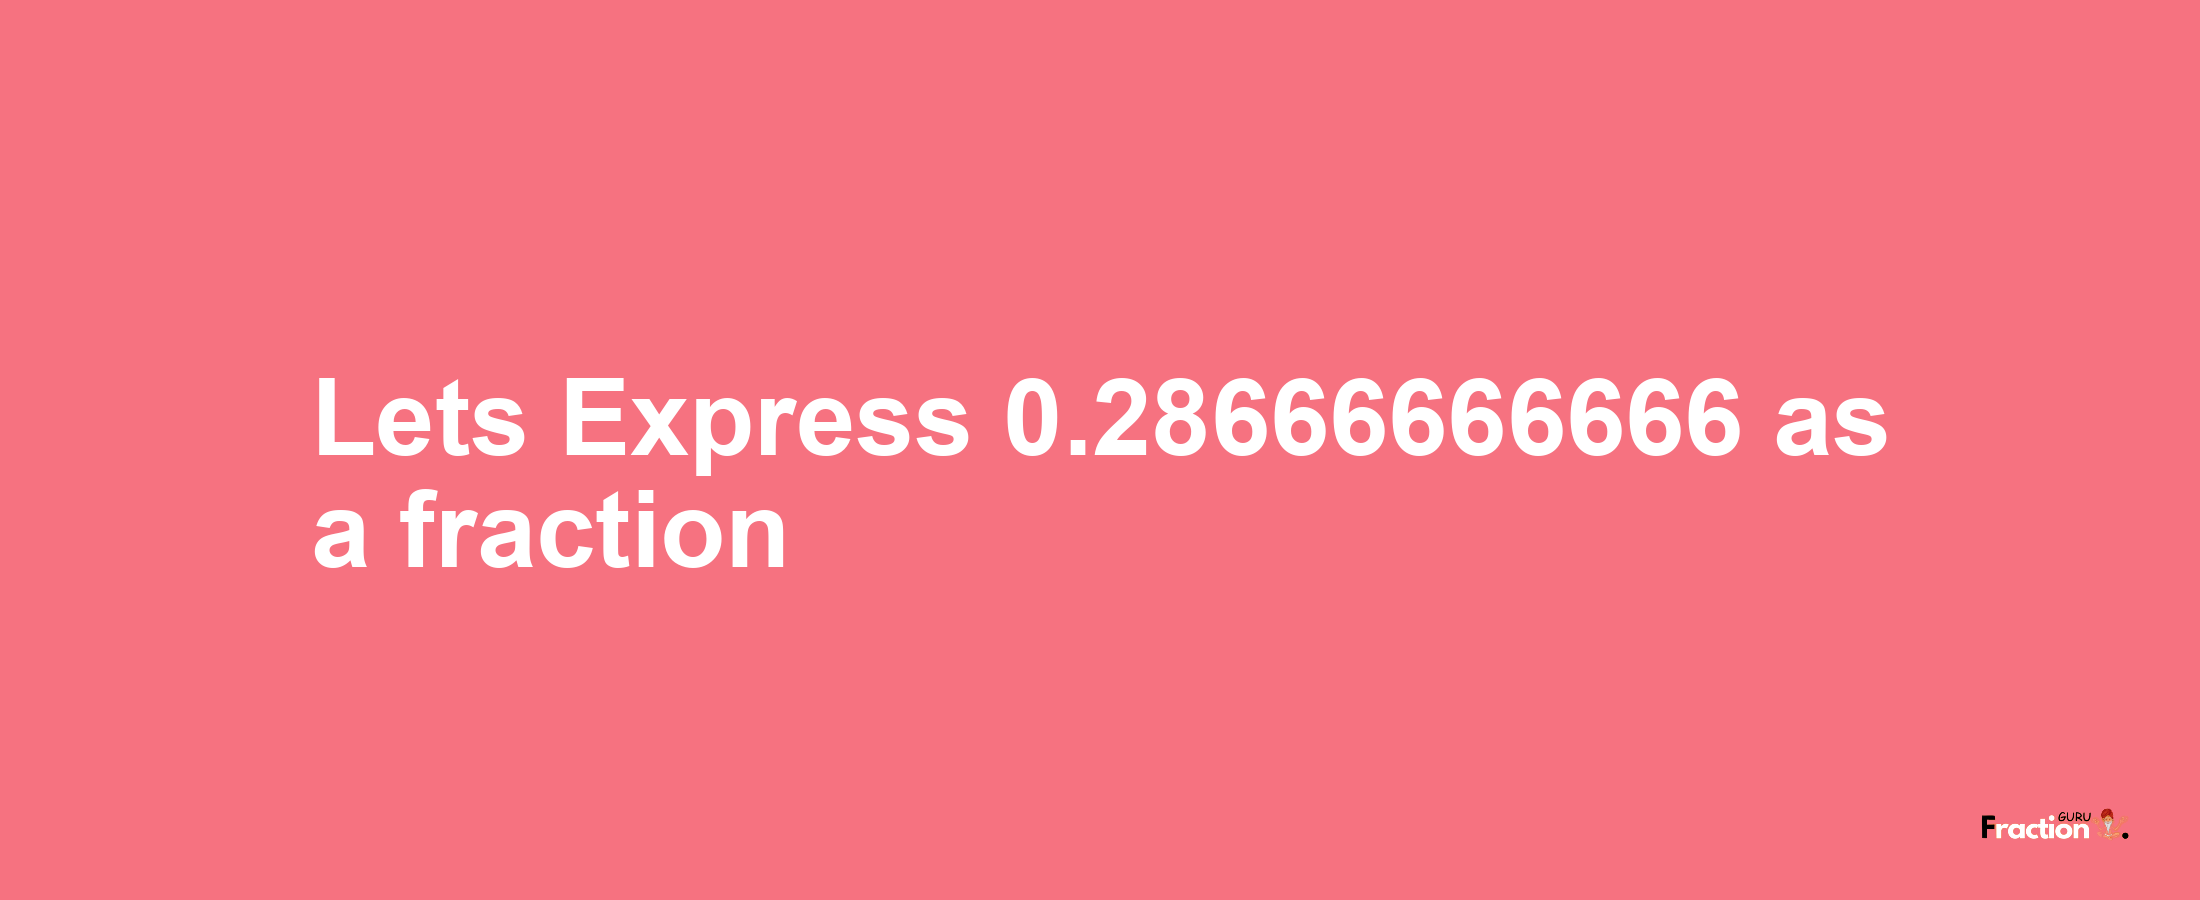 Lets Express 0.28666666666 as afraction